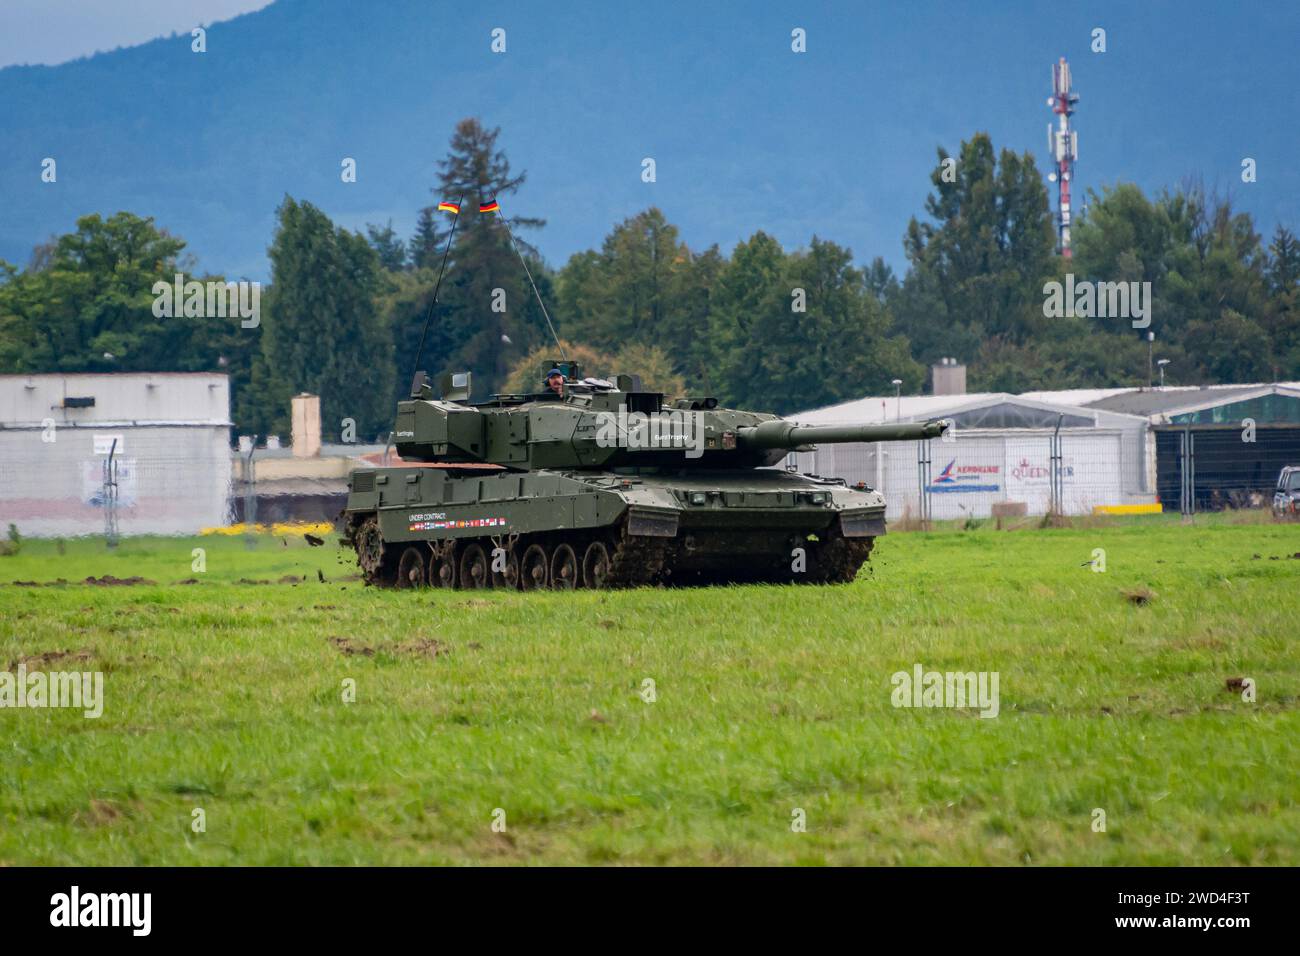 Leopard 2A7 tank (3rd Generation MBT) operated by the German army on a grass field. Stock Photo